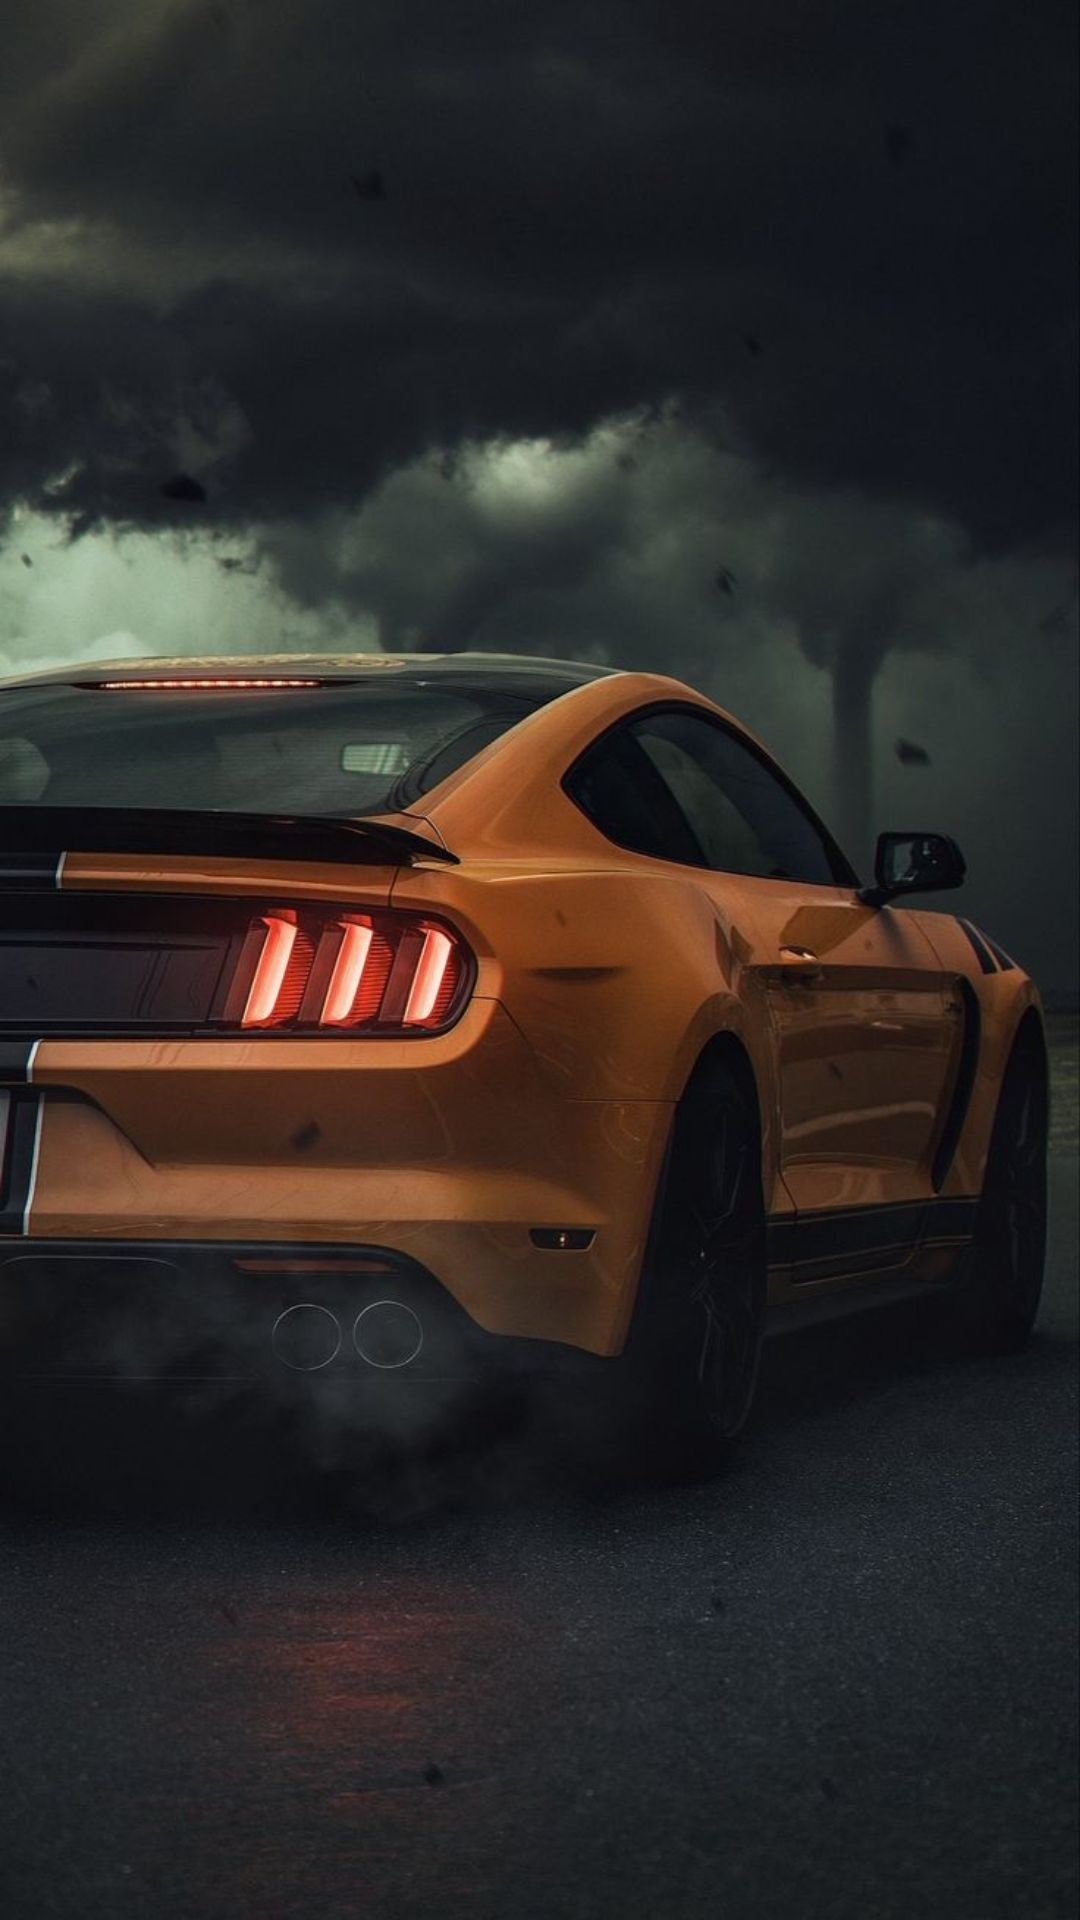 Best Mustang selection, Automotive excellence, Premium models showcase, Horsepower heroes, Cult following, 1080x1920 Full HD Handy